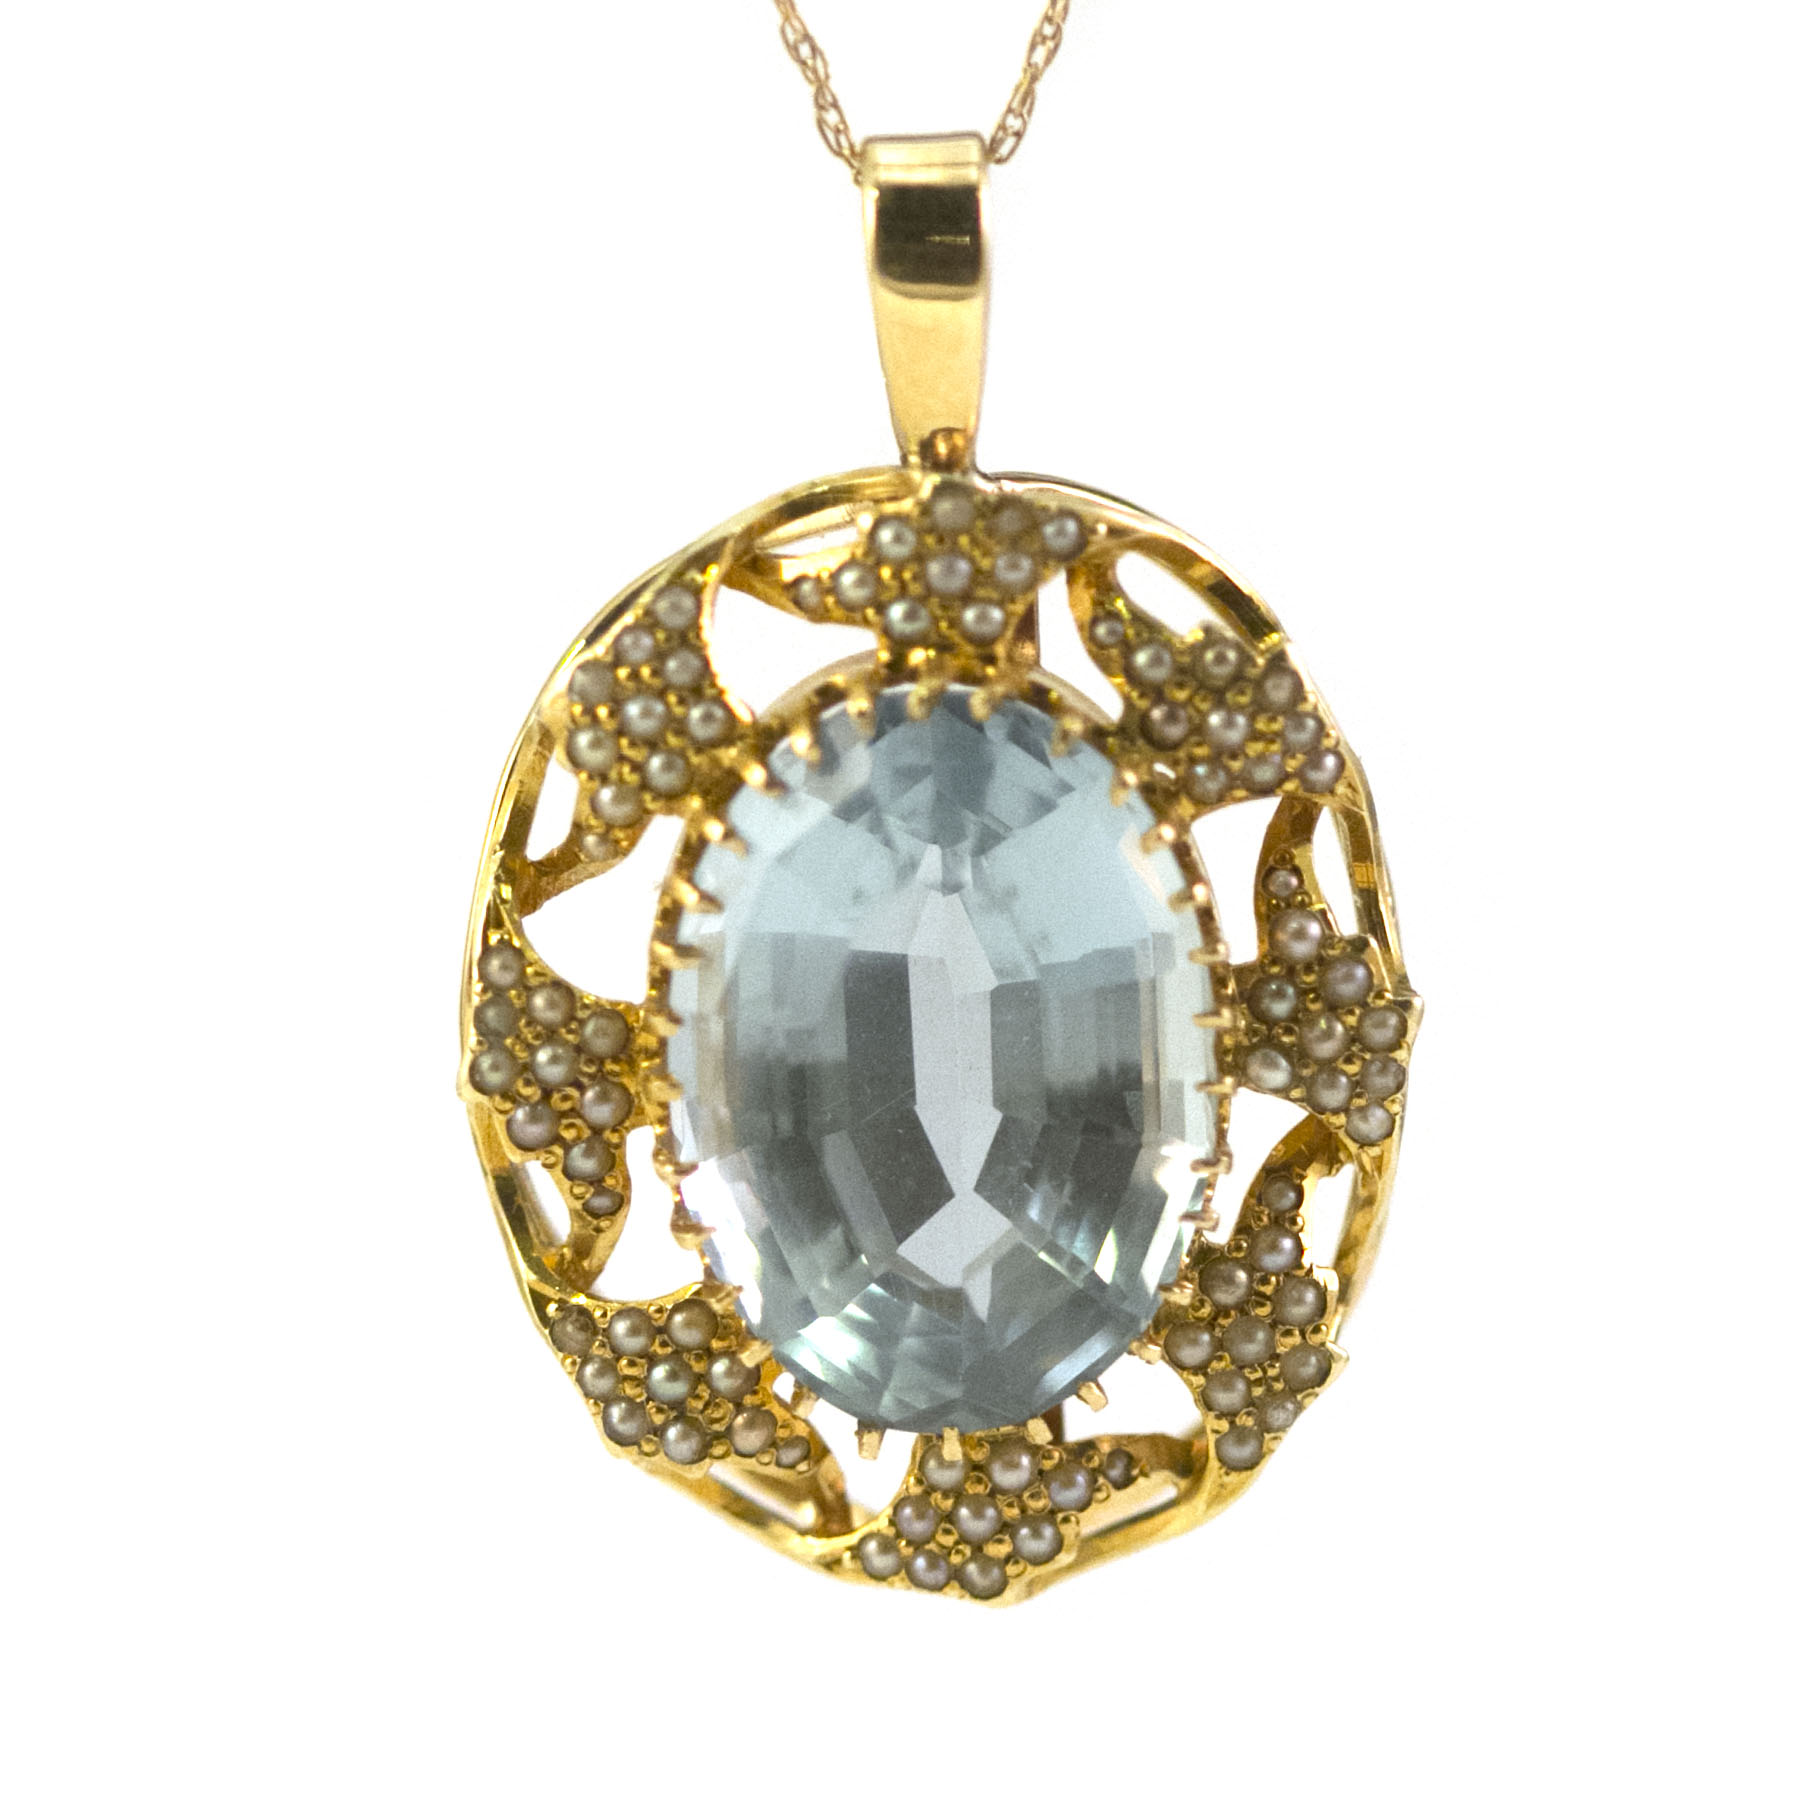 A vintage, 14K yellow gold pendant with a large fine aquamarine stone and accenting seed pearls. Represented by Haig’s of Rochester